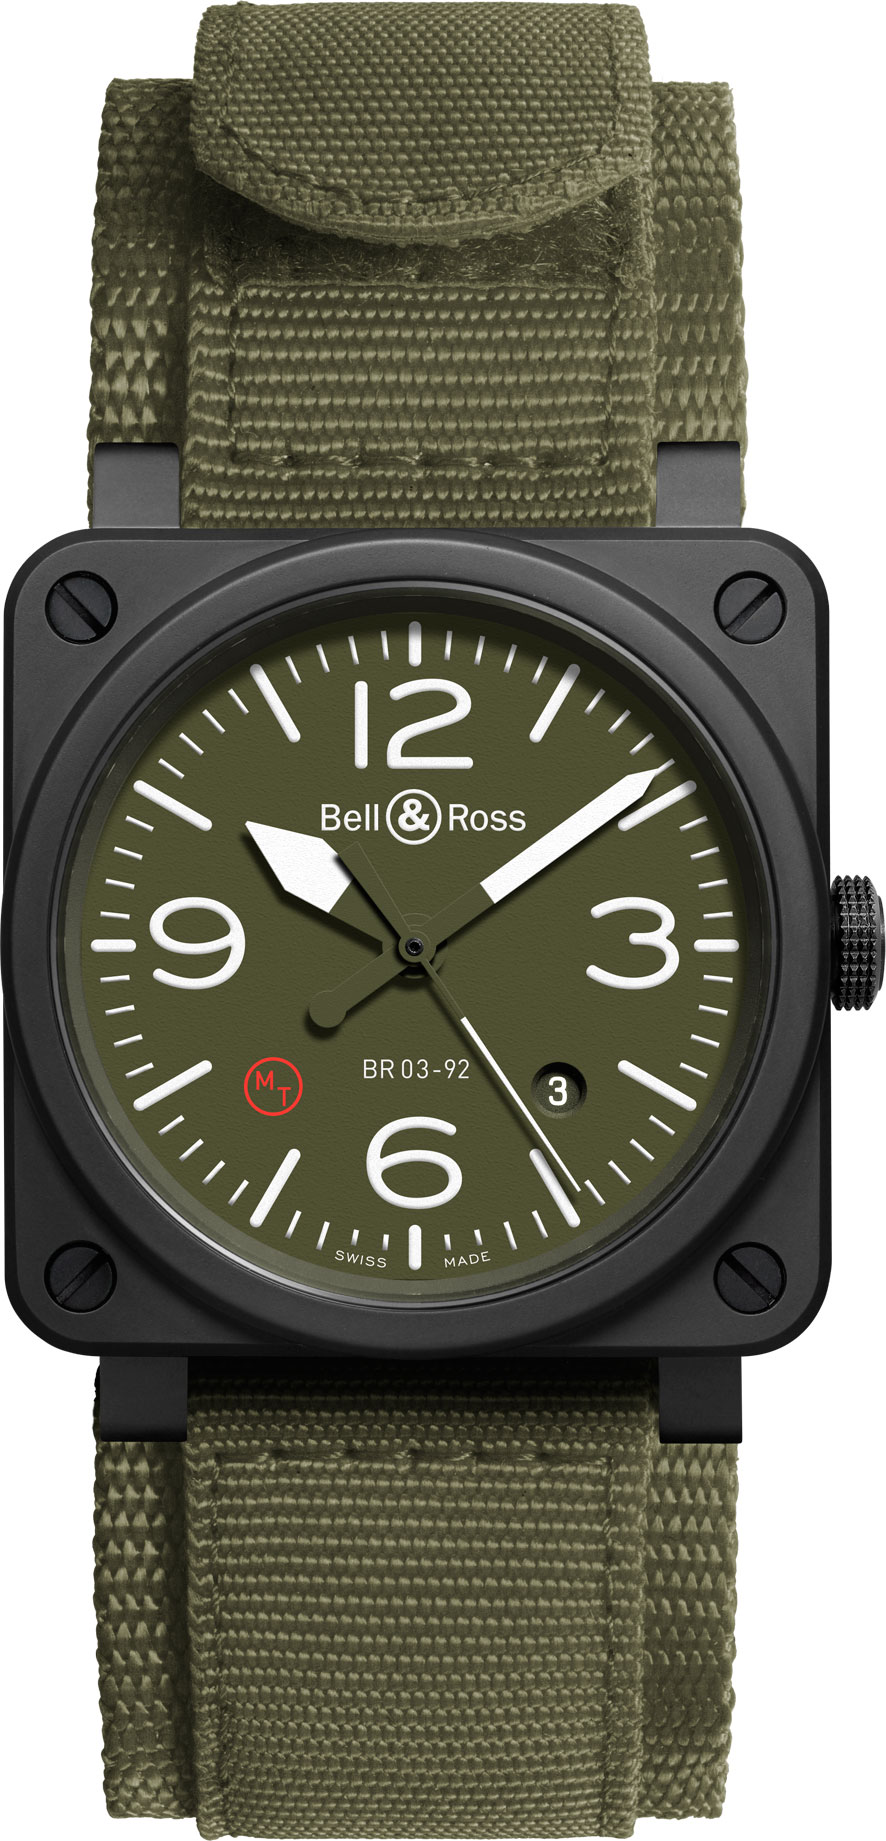 Bell and Ross BR03-92 Ceramic Military Type NATO